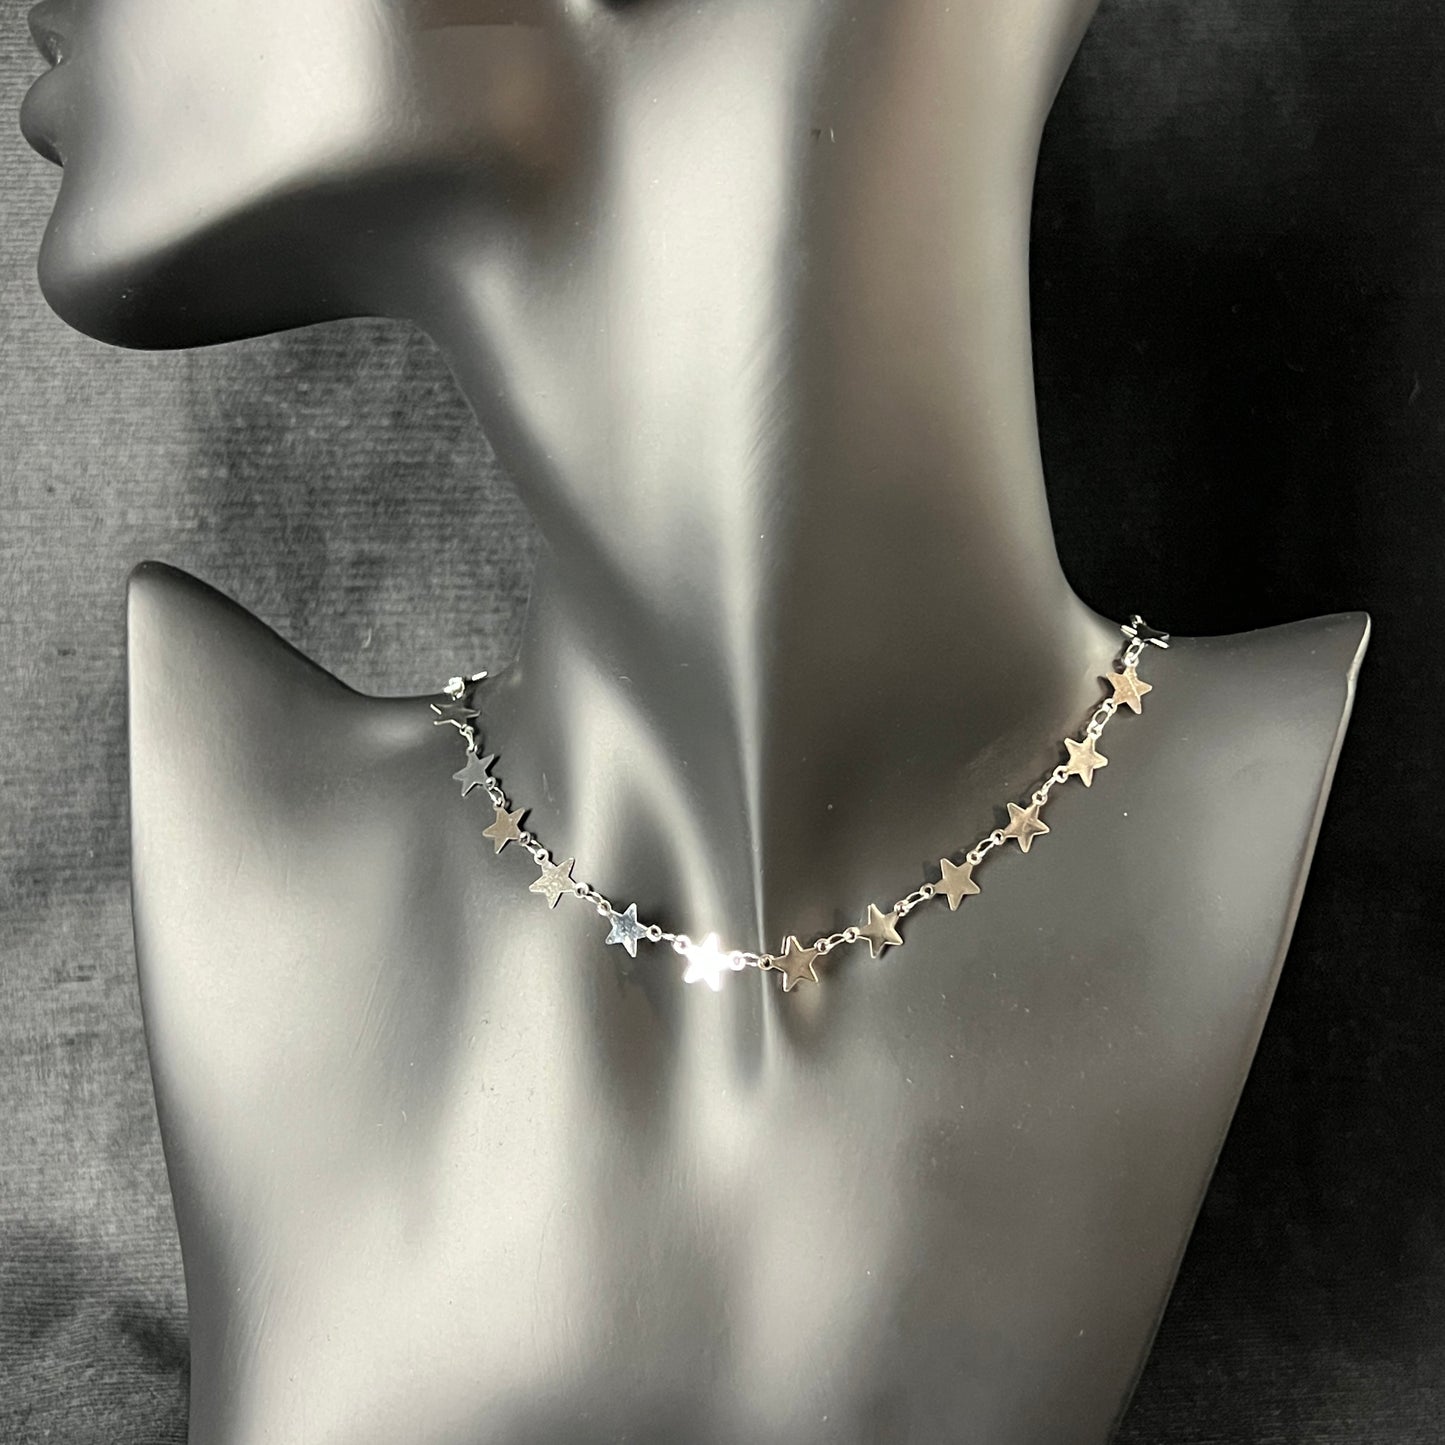 Stars chain necklace made of stainless steel celestial choker perfect stacking jewelry gothic necklace gift for her